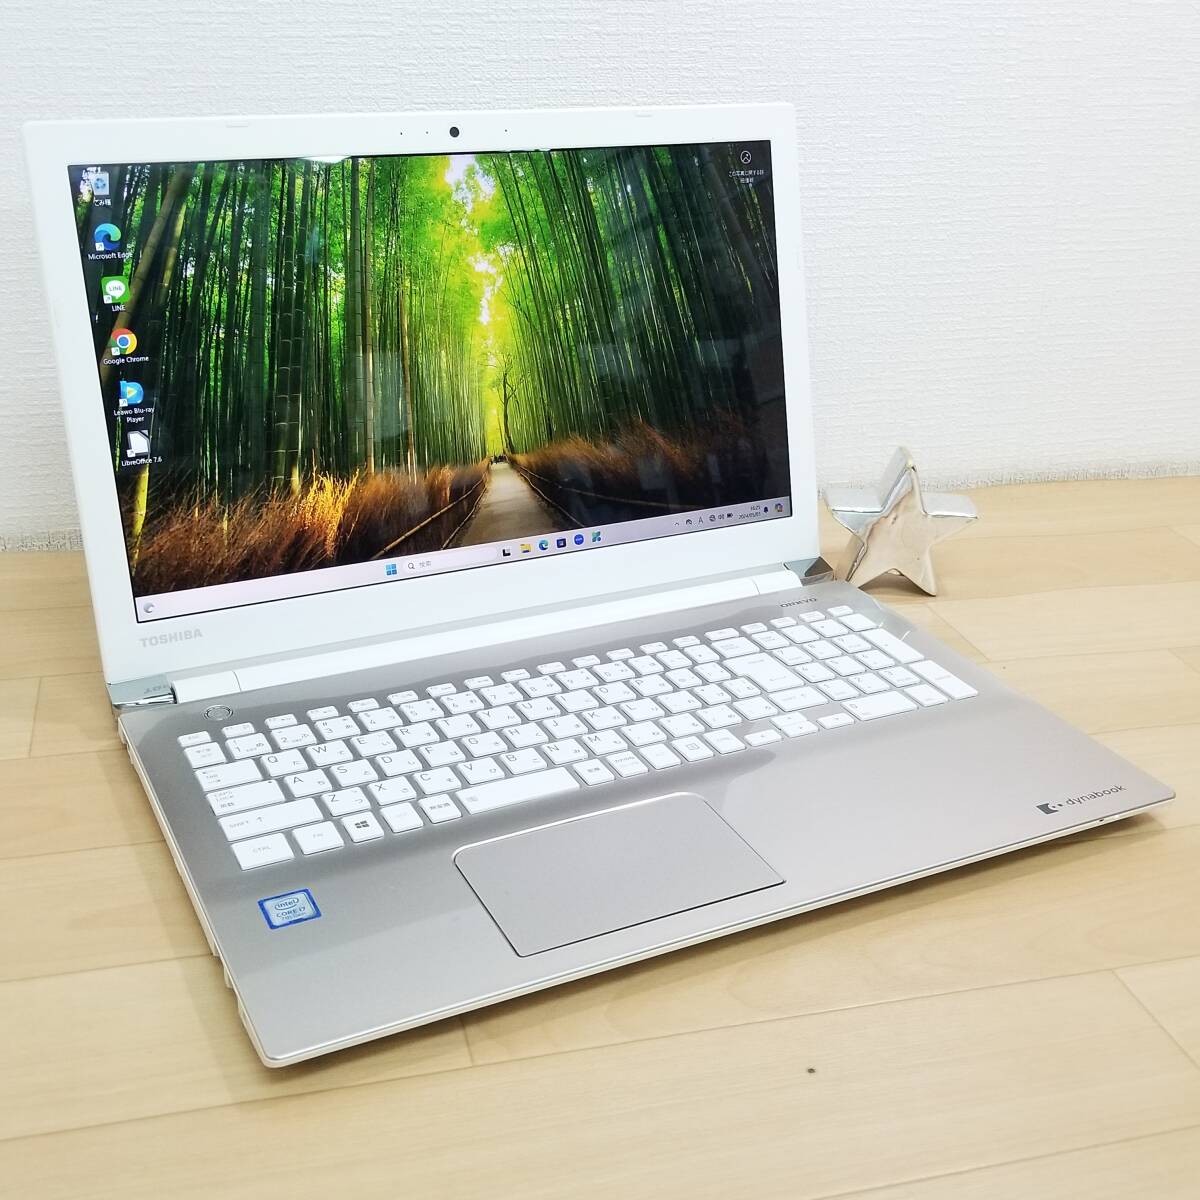  new goods memory 16GB installing / beautiful goods / prompt decision with special favor! no. 7 generation i7/HDD1TB/Web camera /Office/ Speed shipping /Win11/ immediately use possible Note PC(D6486)